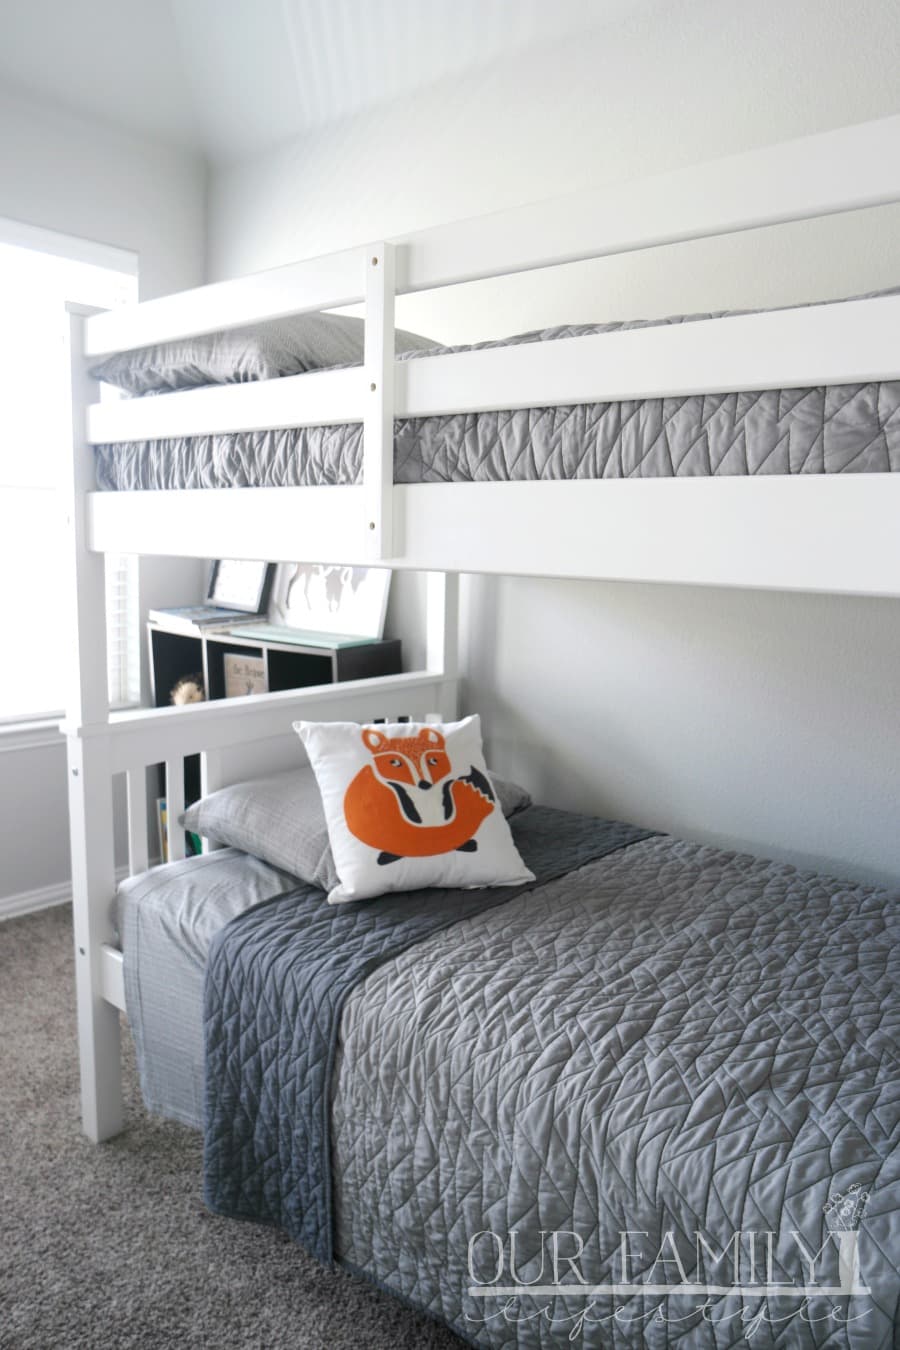 Alimi bunk beds from Wayfair